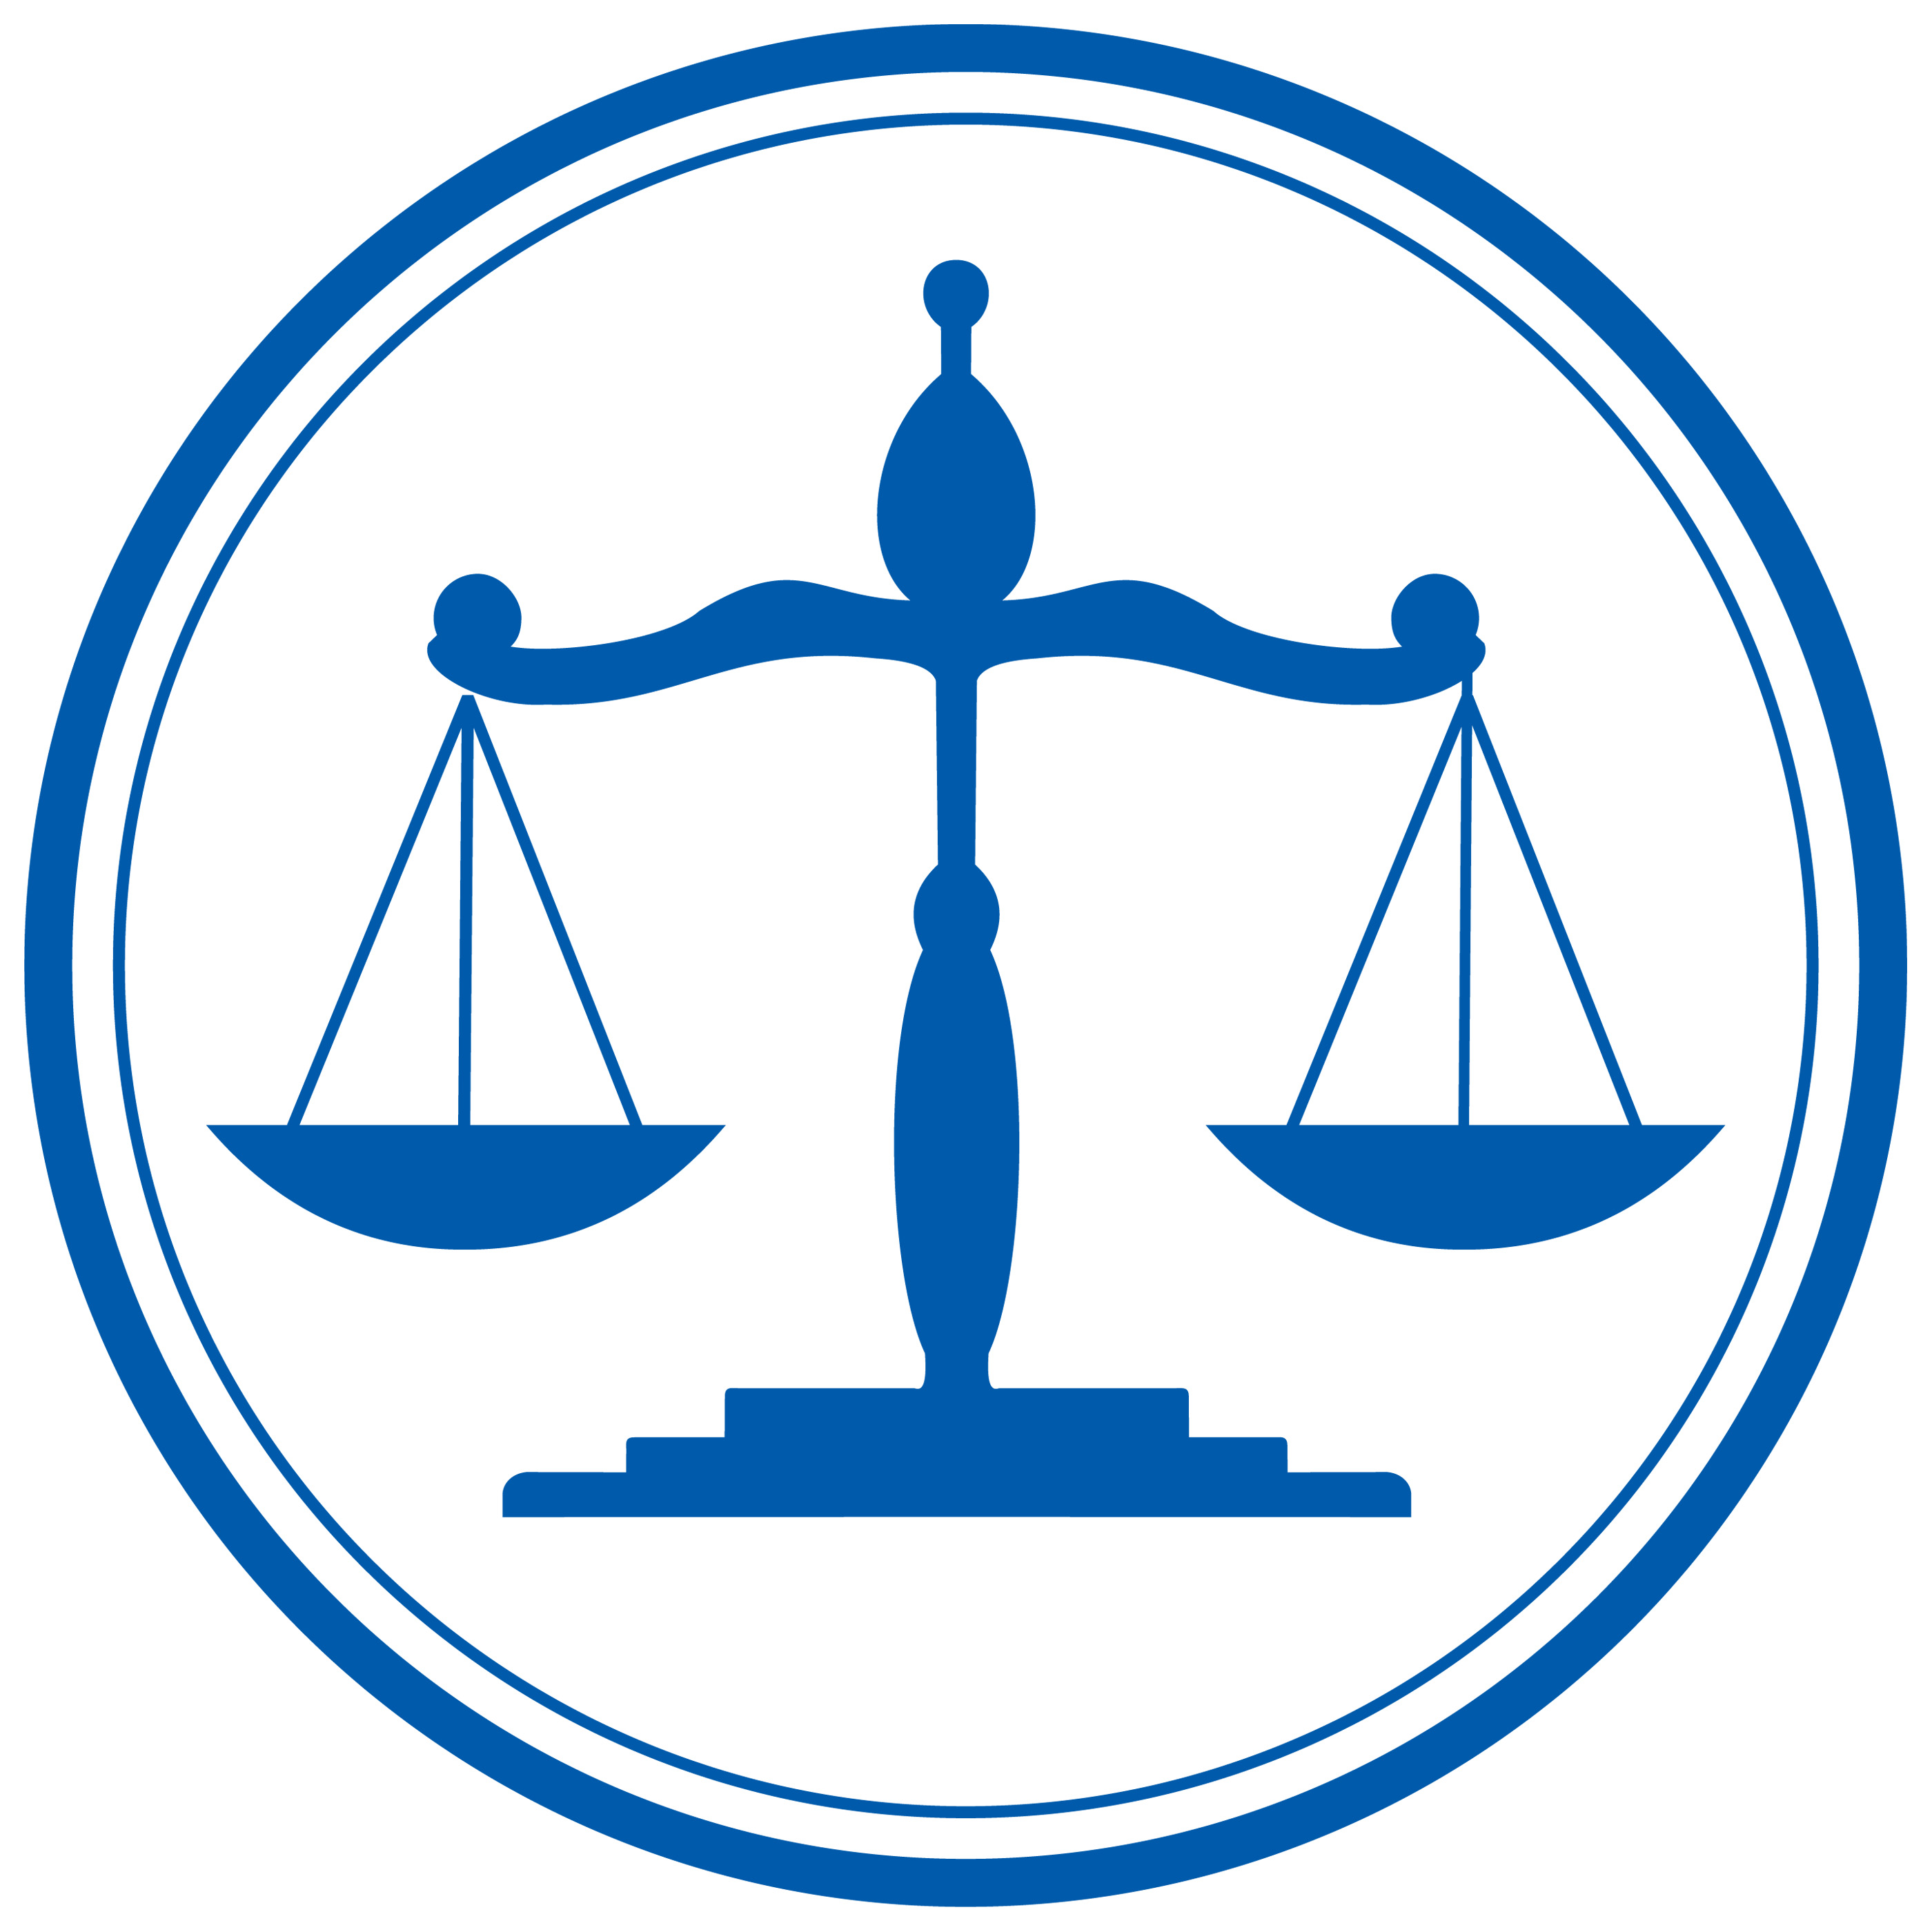 Legal scales clipart